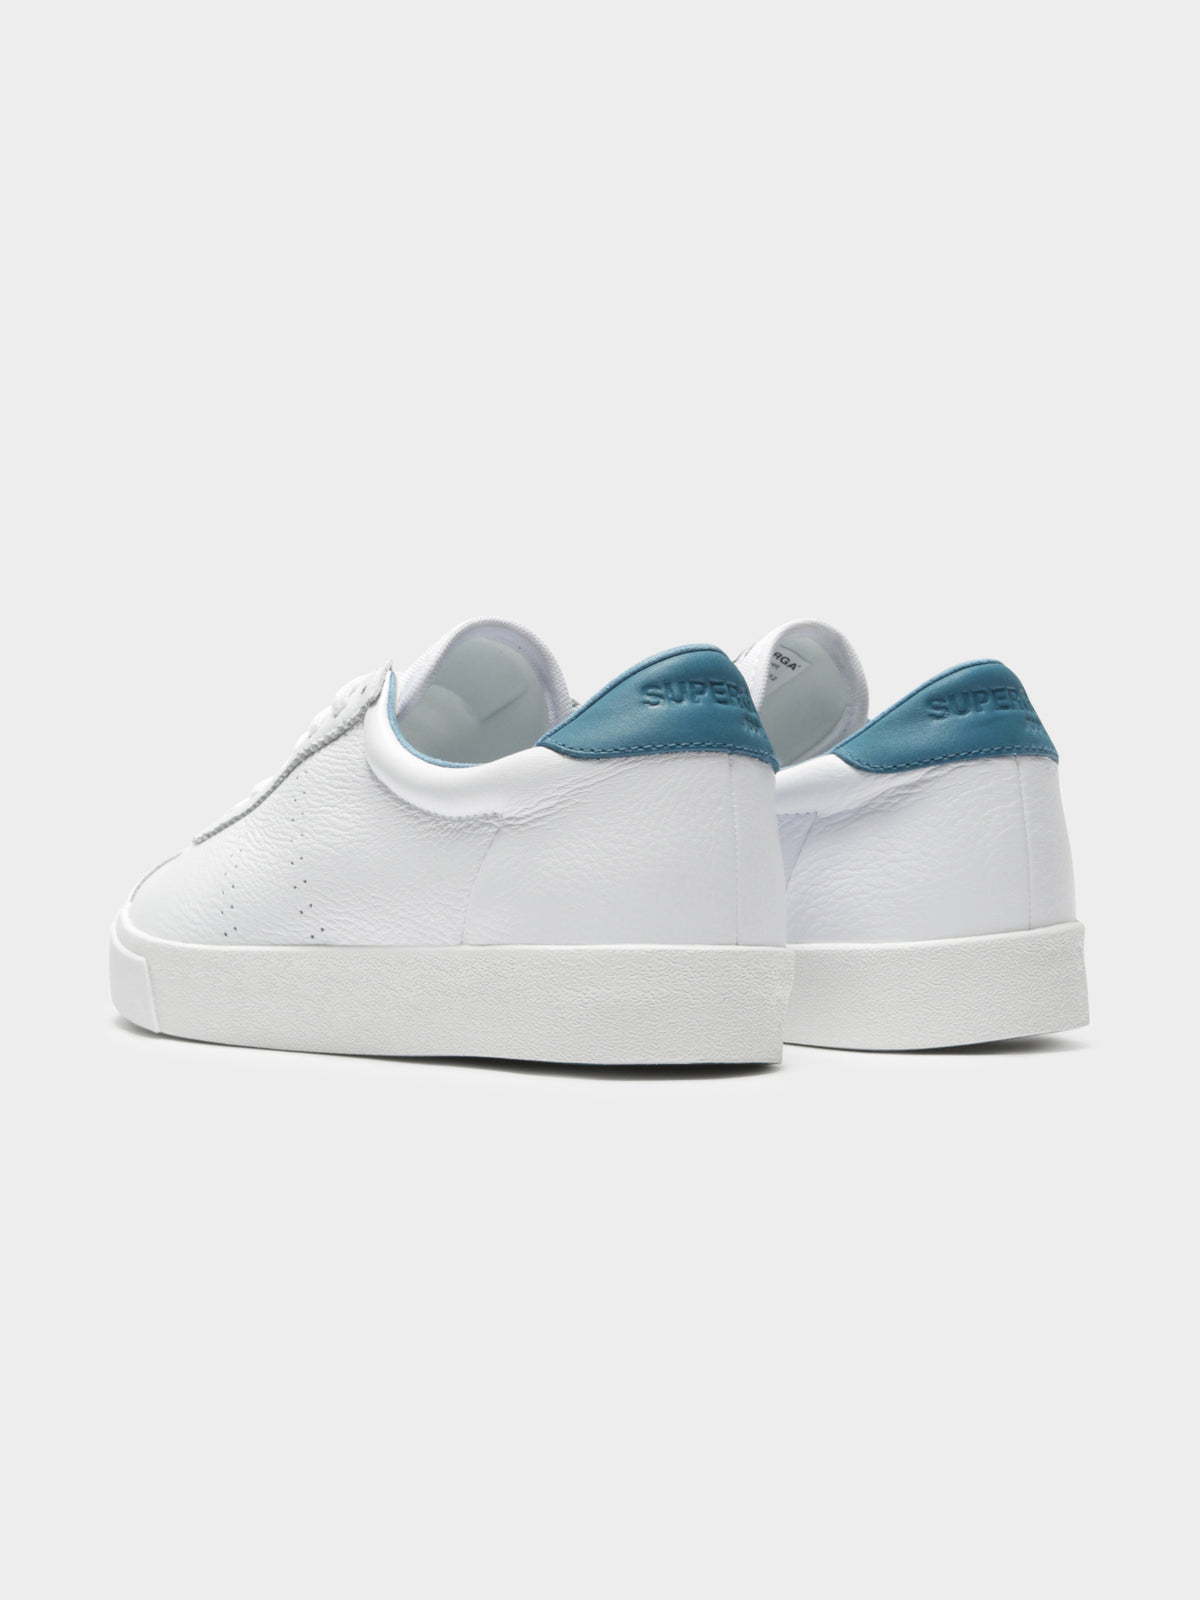 2843 Clubs Comfleau Sneakers in White &amp; Blue